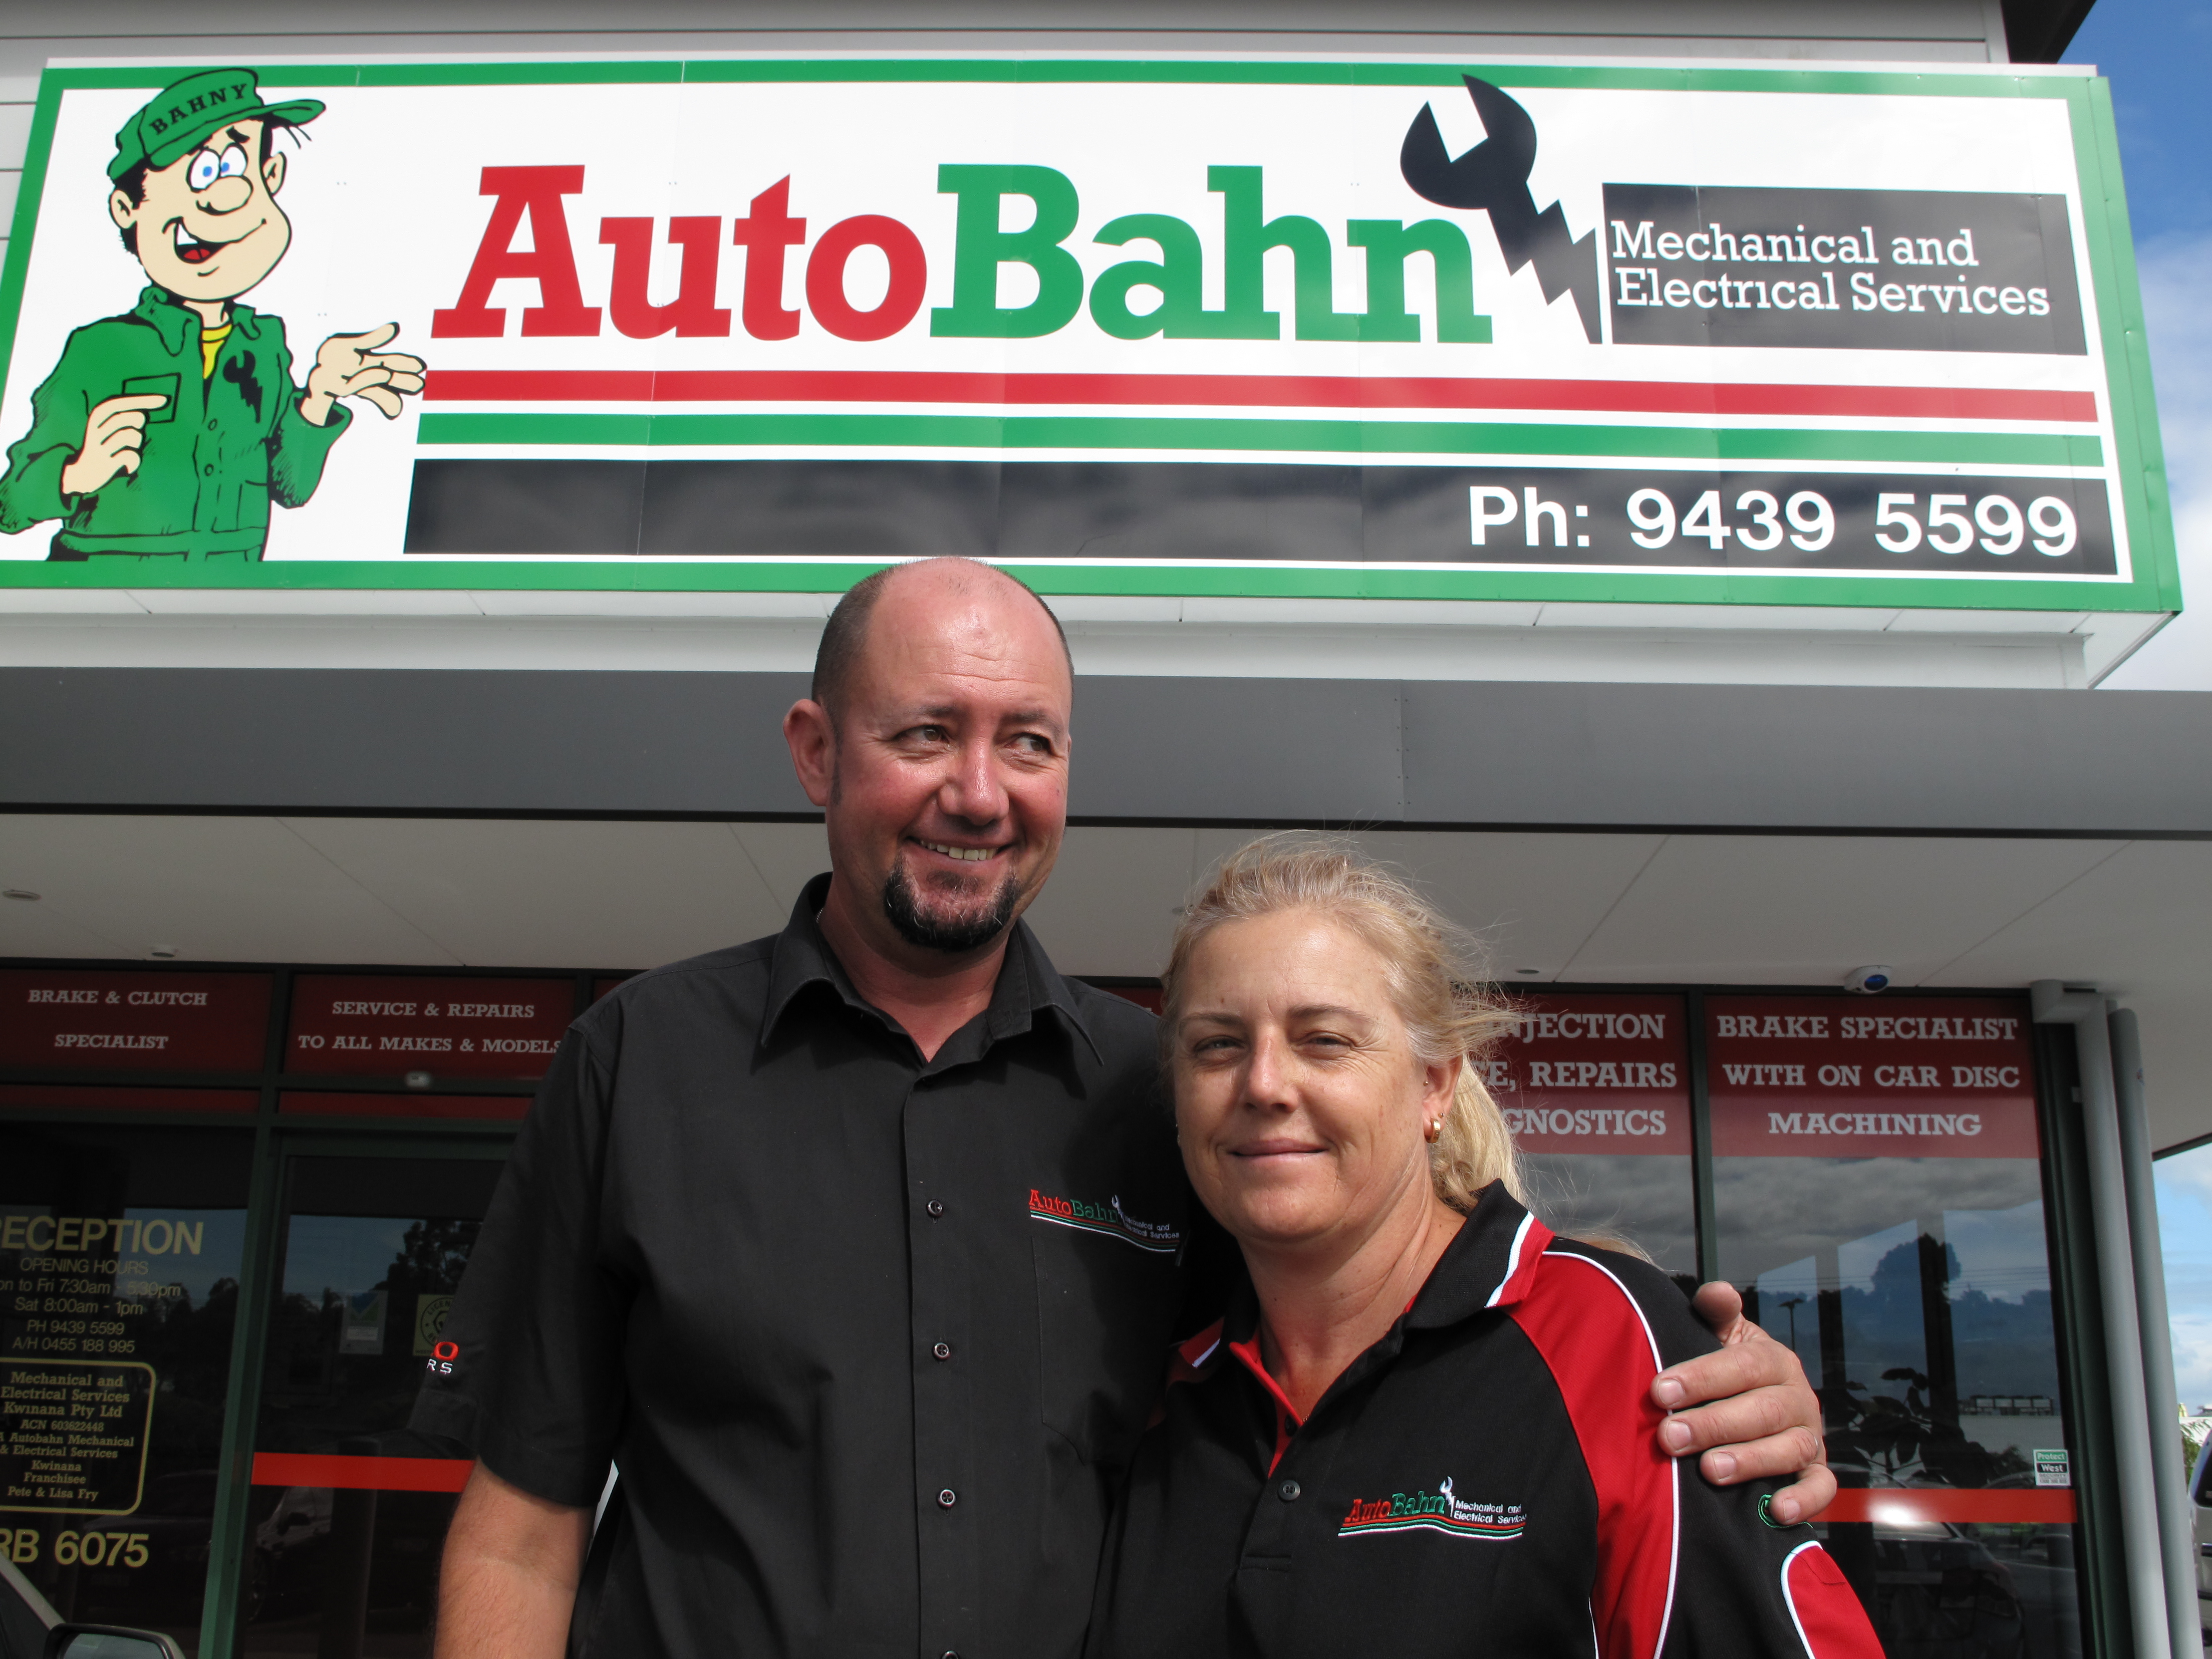 Images Autobahn Mechanical and Electrical Services Kwinana